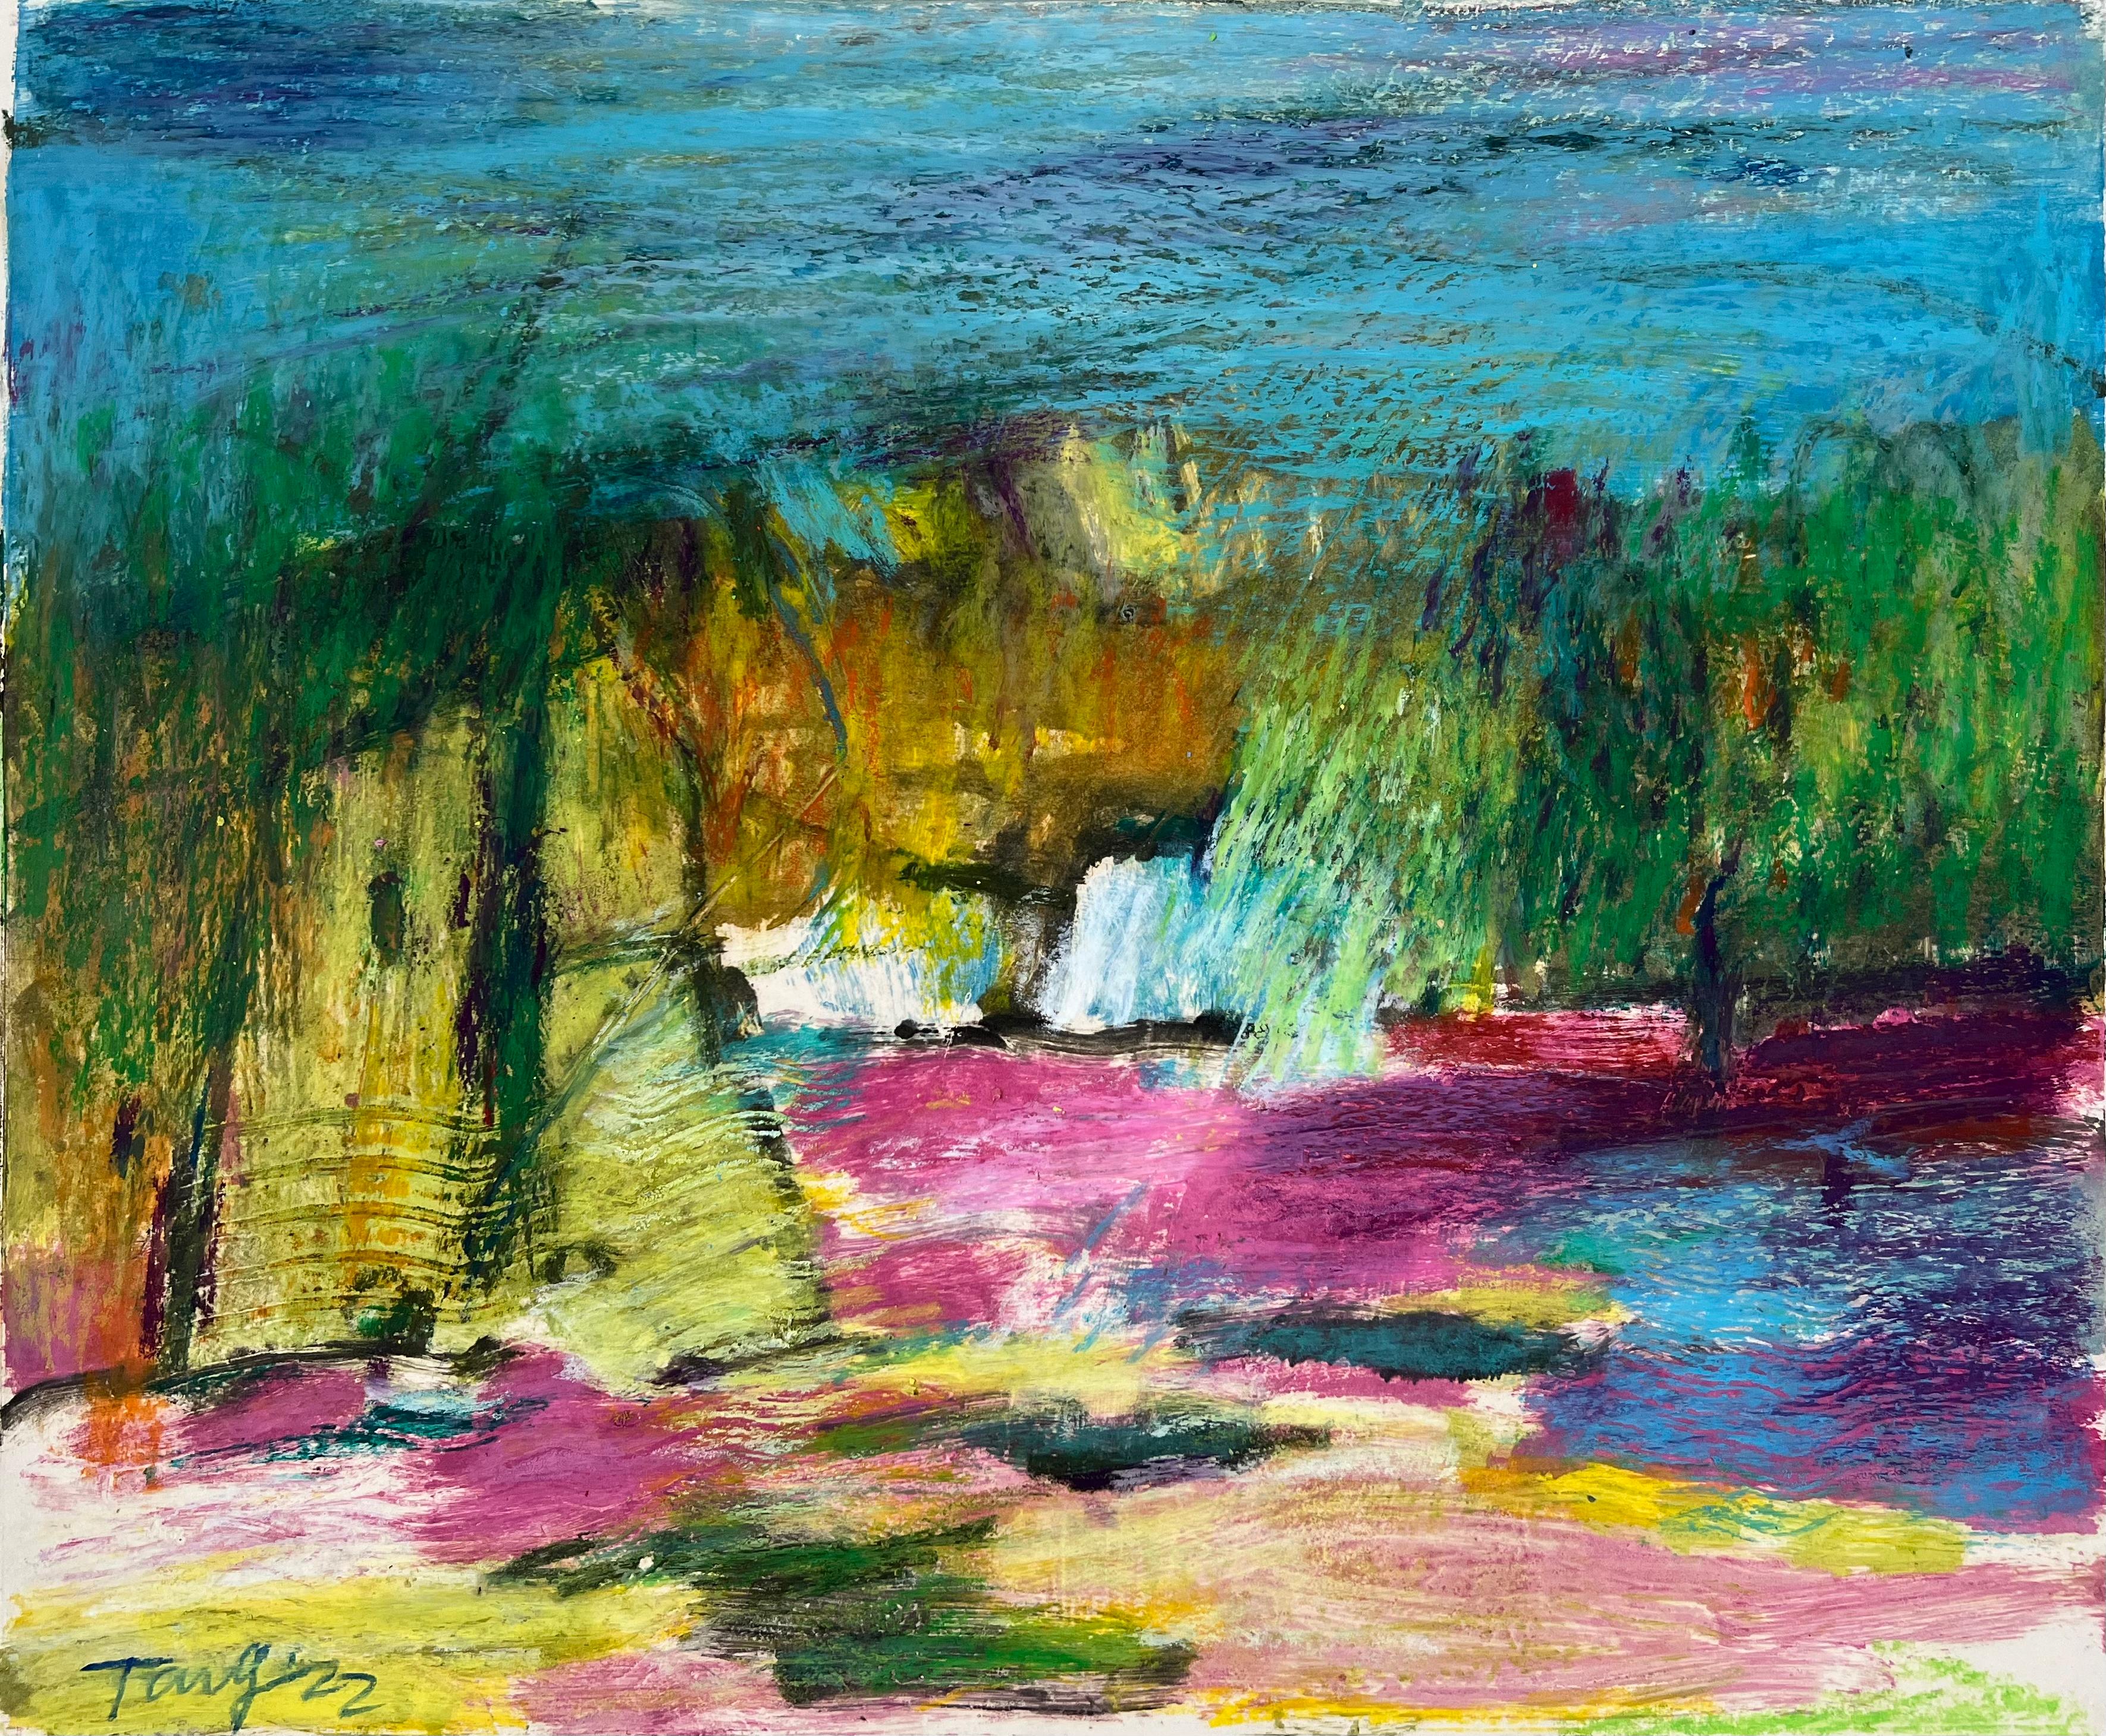 Abstract Expressionist oil painting  - Series The Exotic Landscape No.22-7